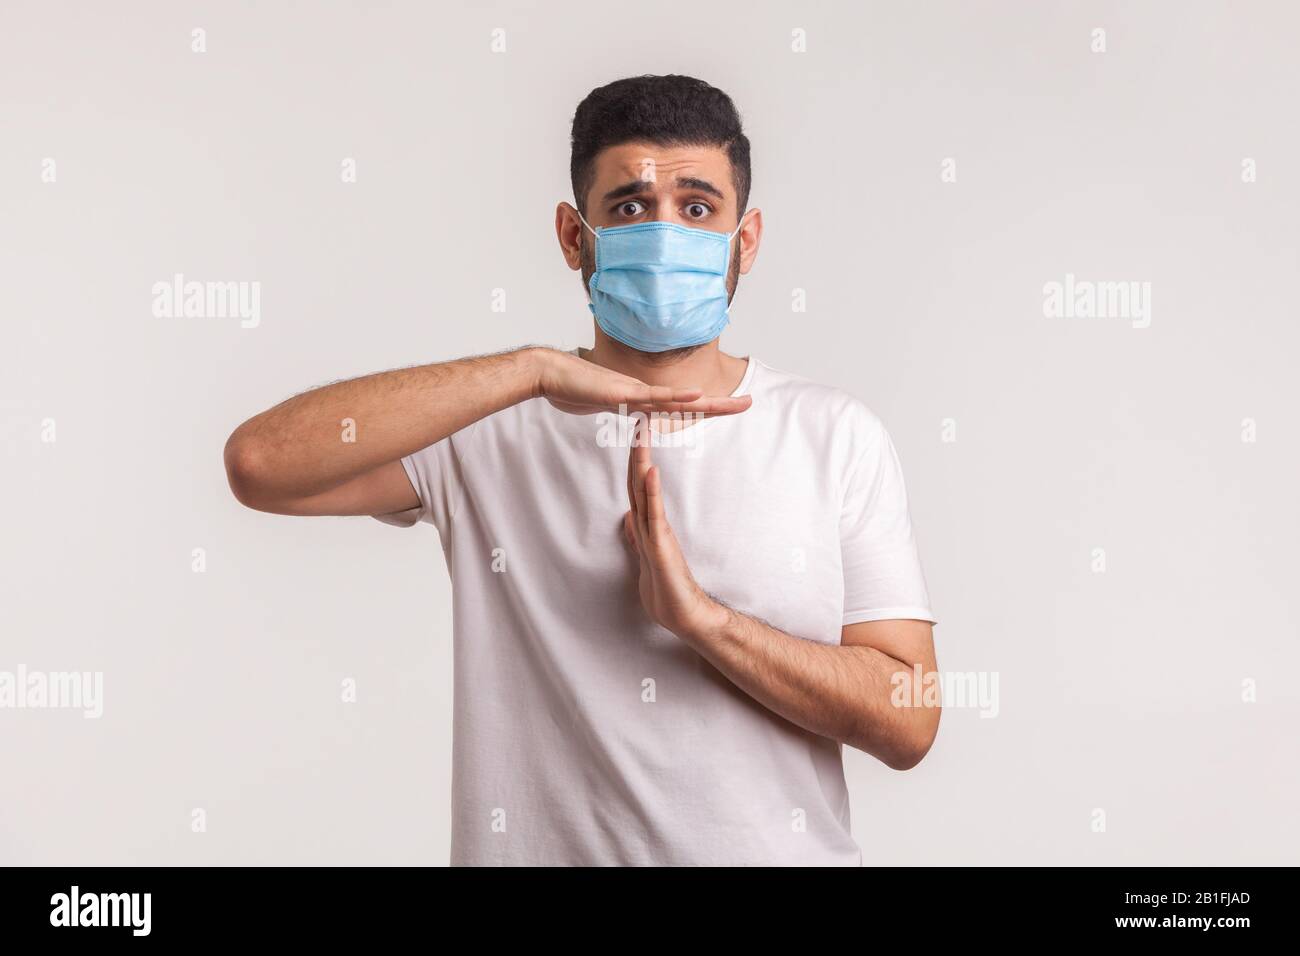 Frightened man in protective hygienic mask showing time out gesture, pleading to stop coronavirus epidemic, infection, respiratory diseases such as fl Stock Photo